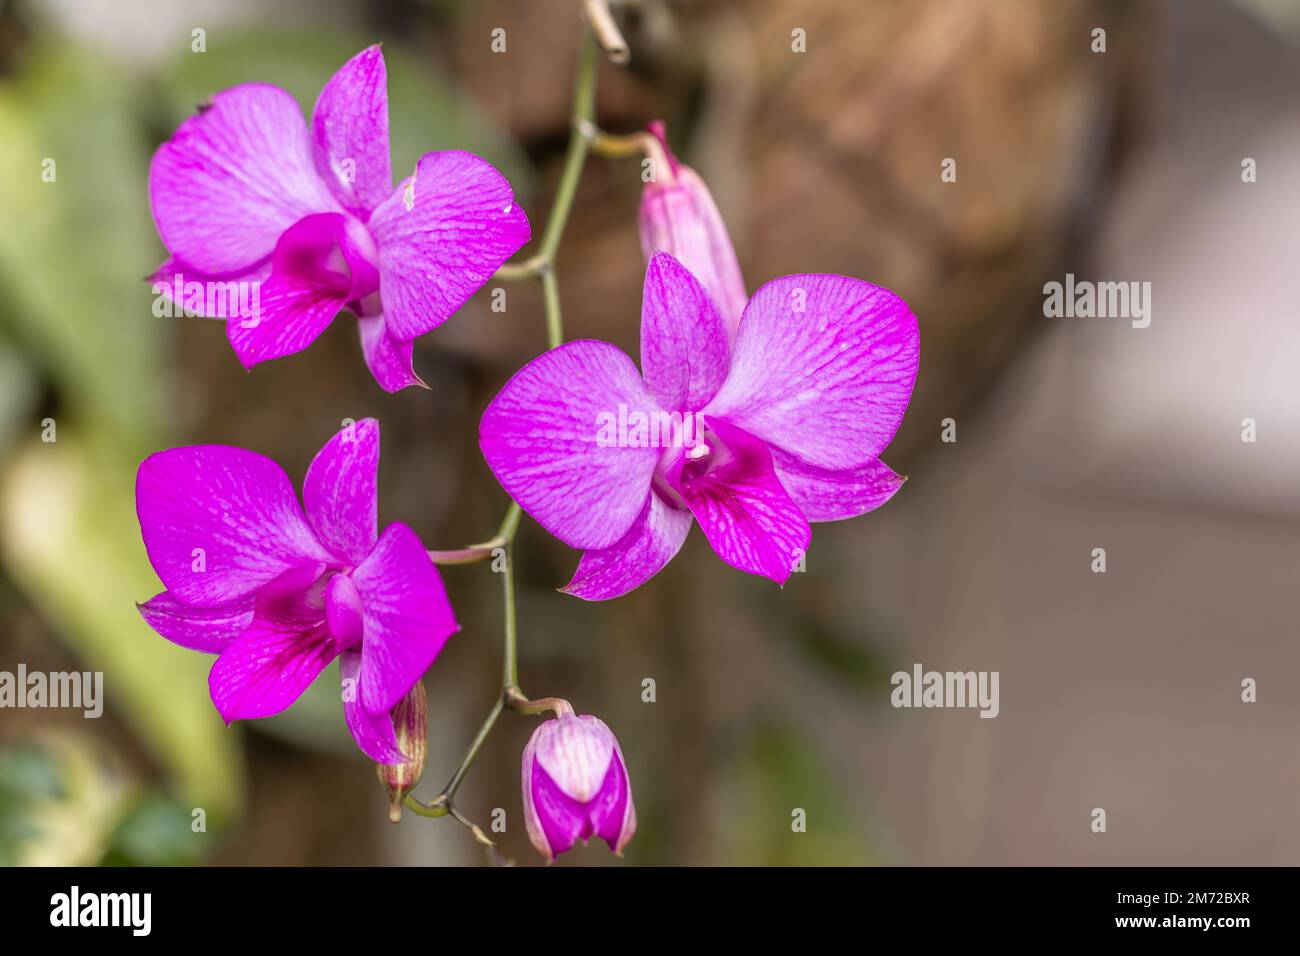 A purple and white dendrobium nobile orchid flower, blurred background of leaves and natural light Stock Photo